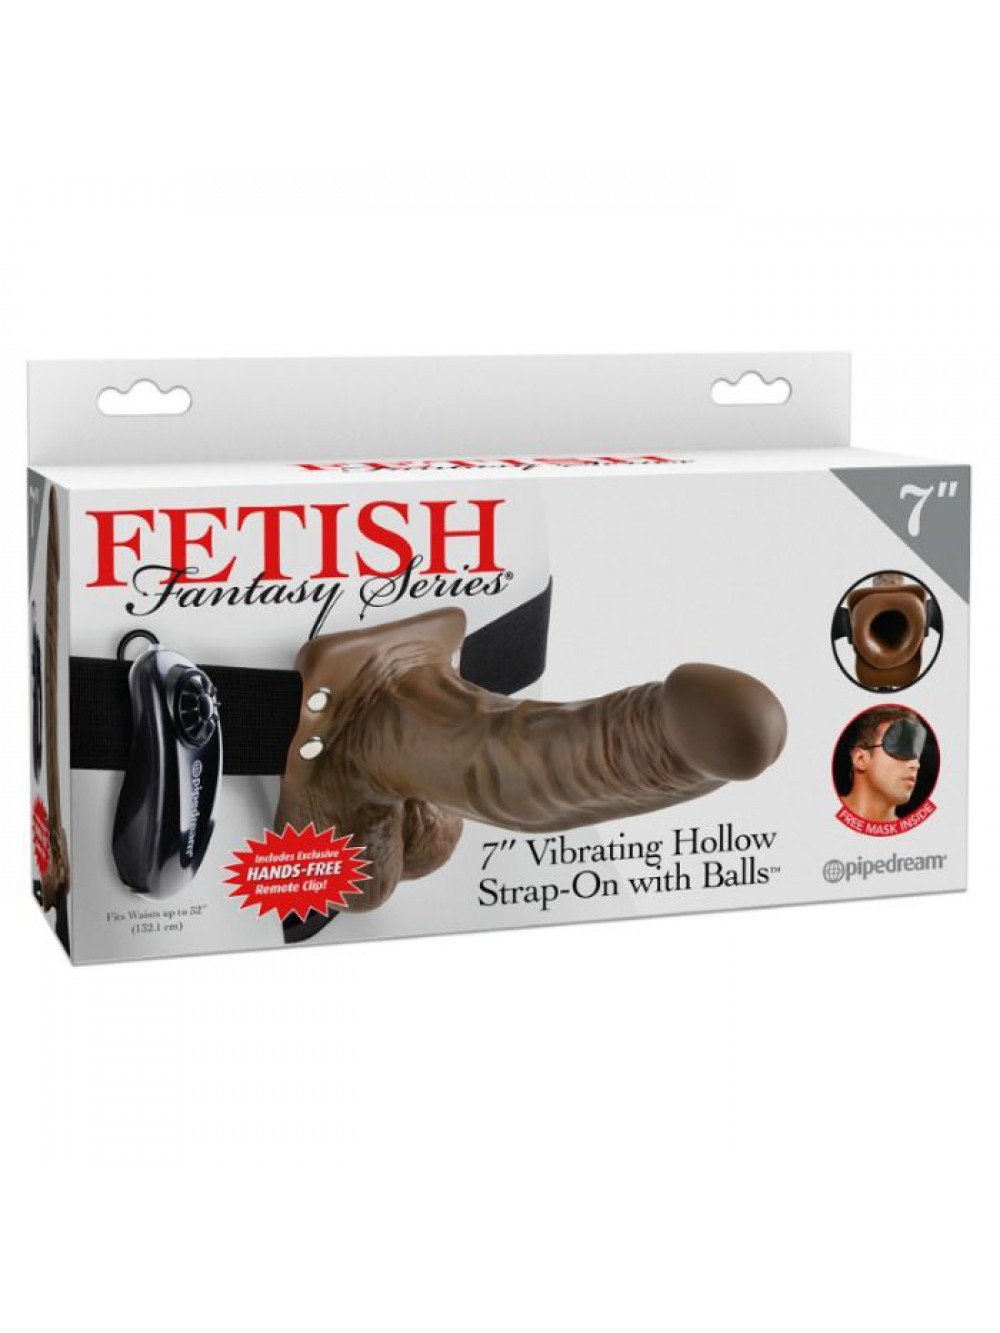 FETISH FANTASY SERIES 7" VIBRATING HOLLOW STRAP-ON WITH BALLS 603912741537